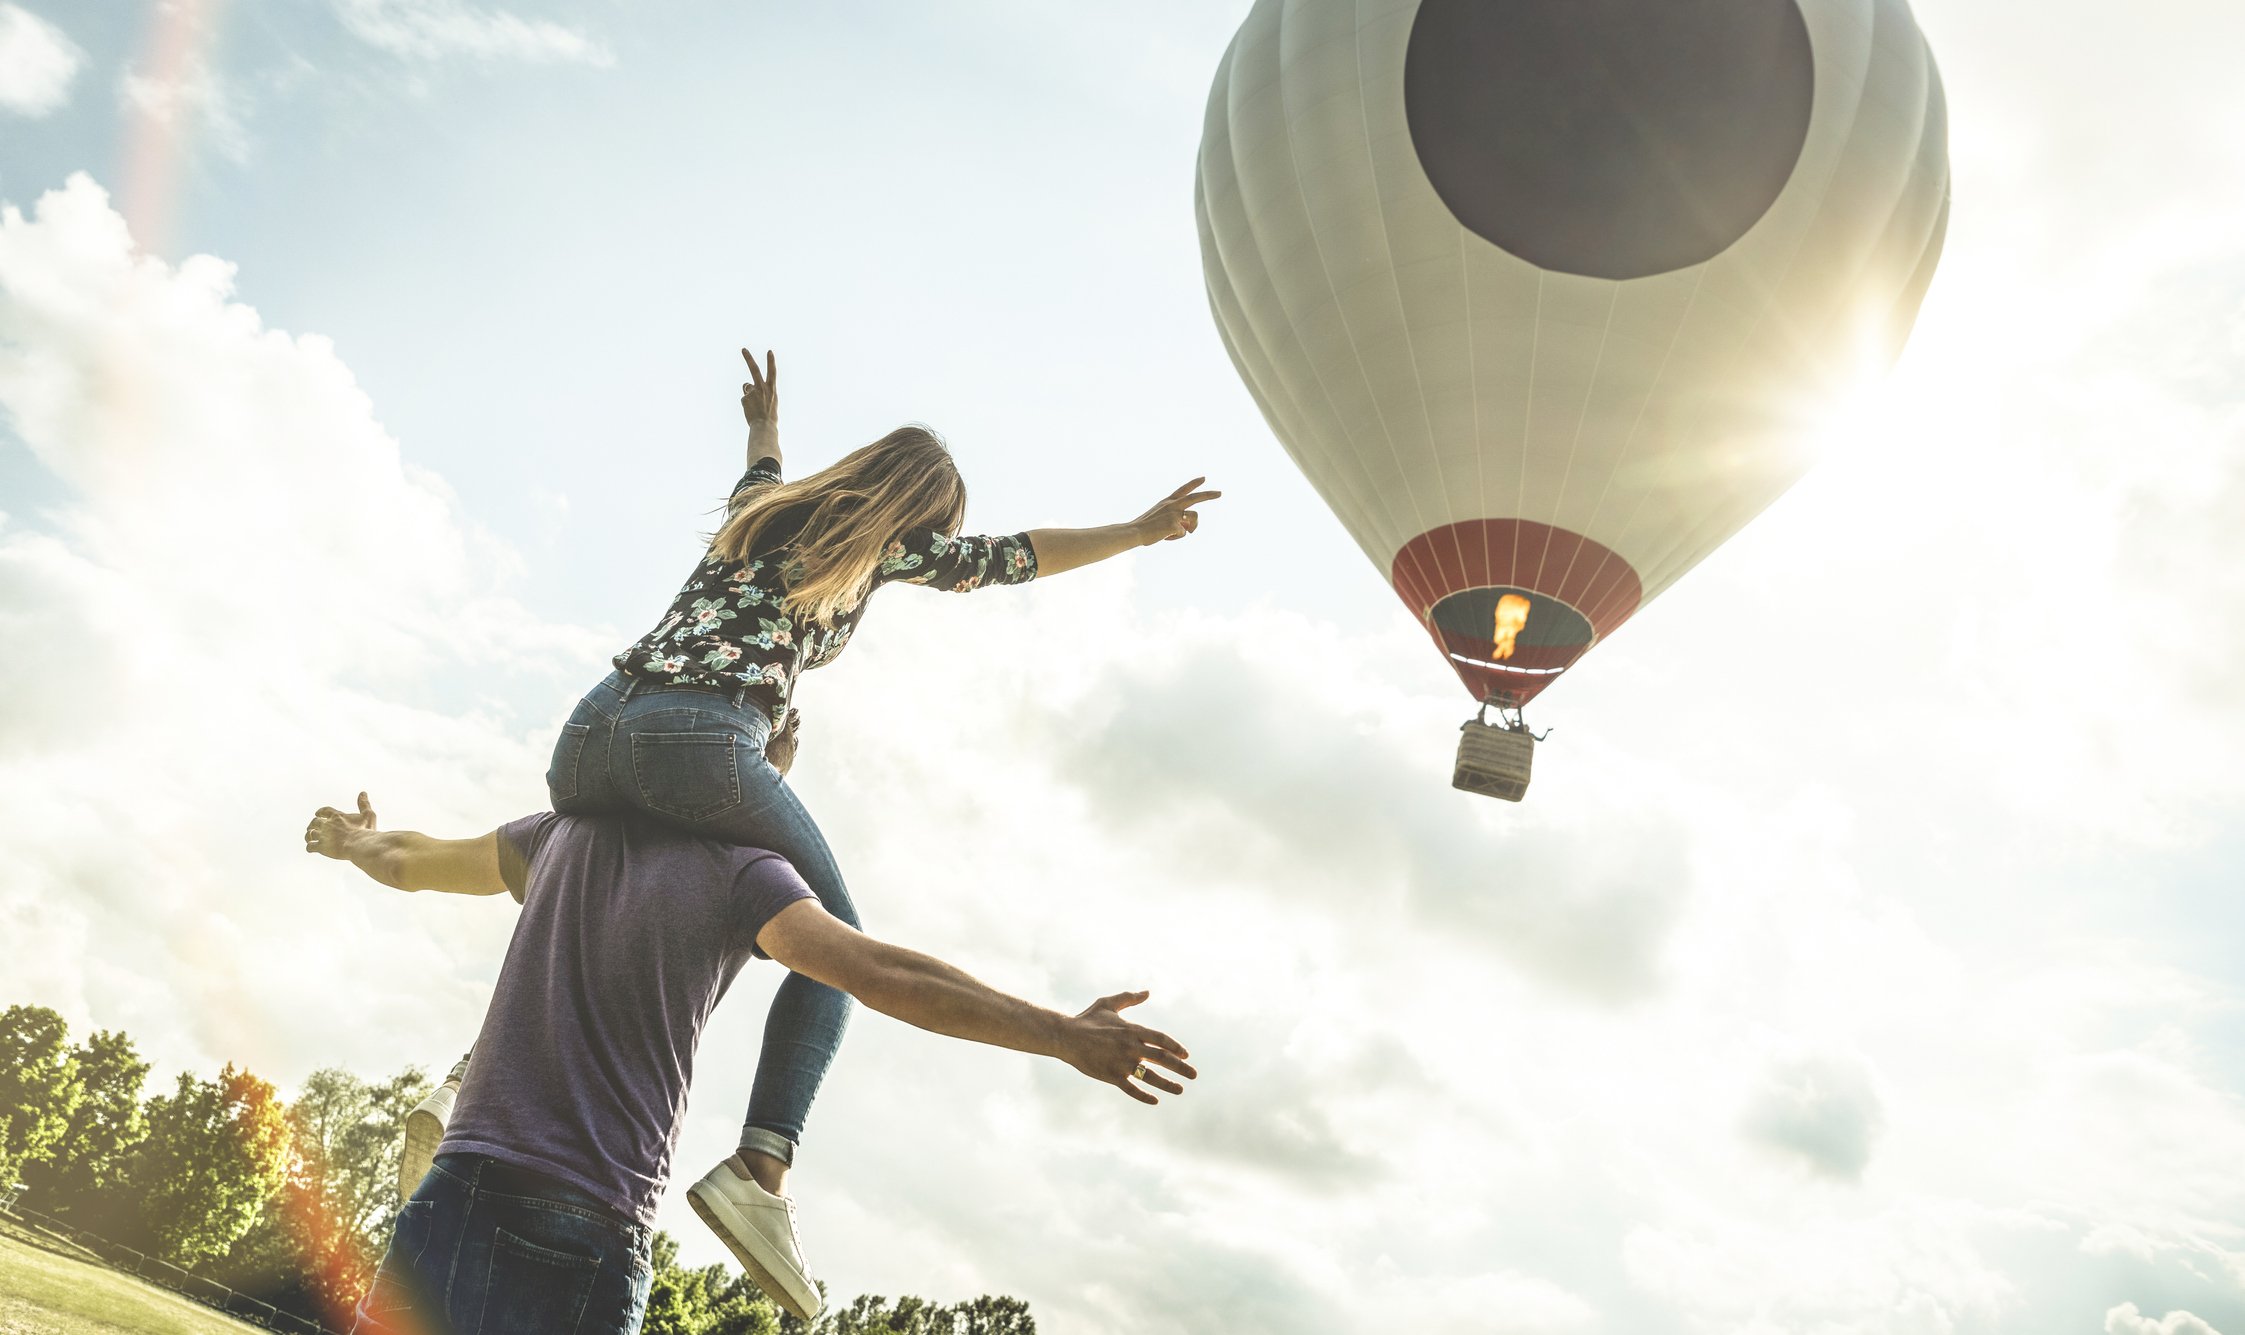 Photo of a couple having fun while a hot air ballon flying in the sky. | Photo: Getty Images